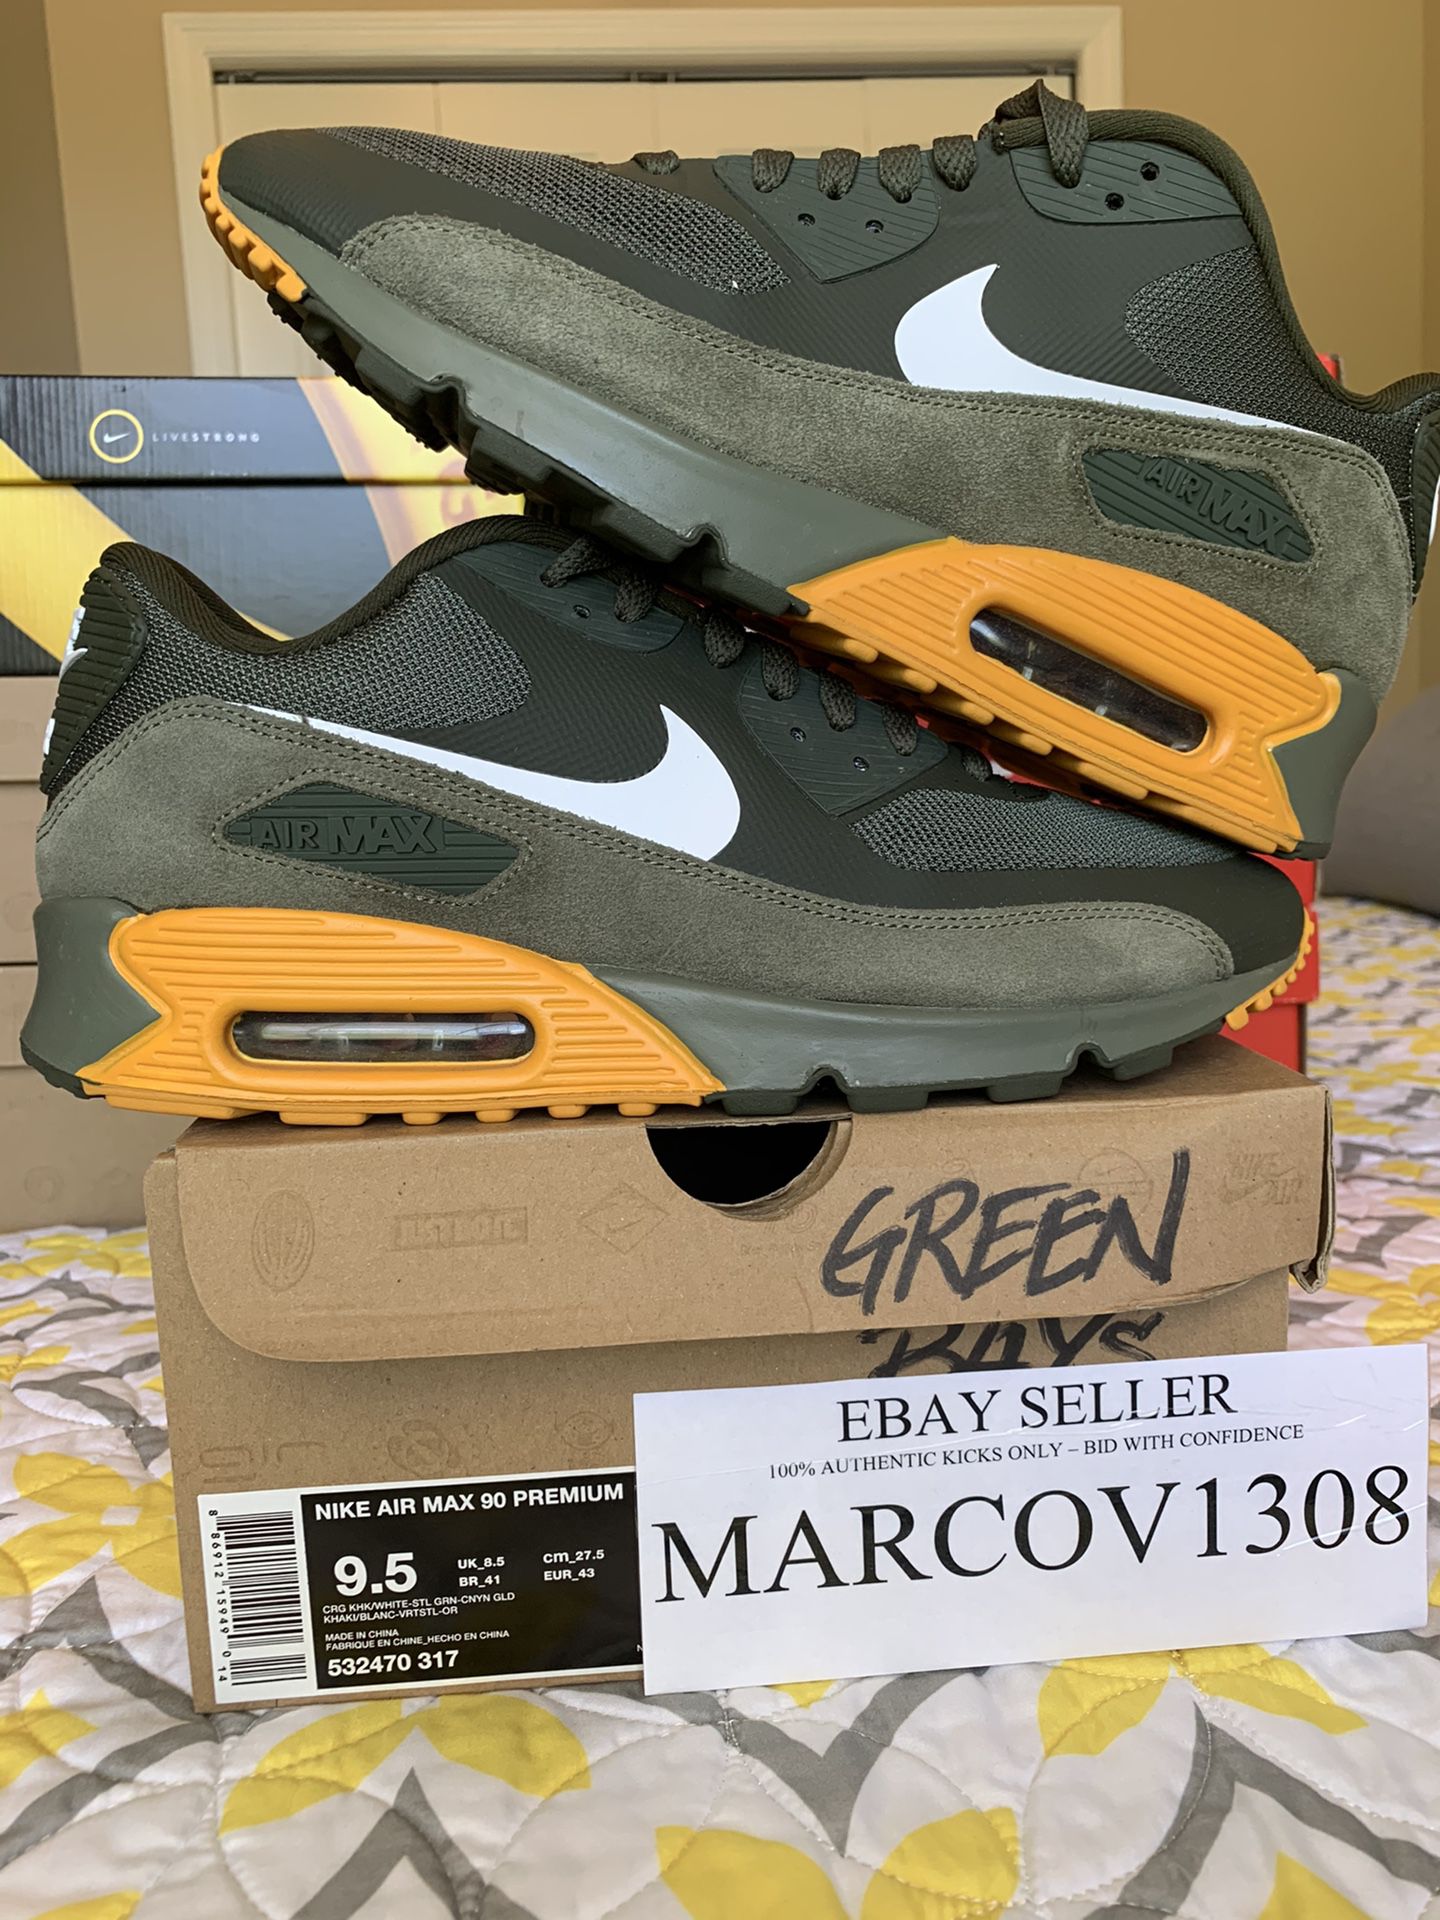 Nike Air Max 90 - Used - Size 9.5 - $120